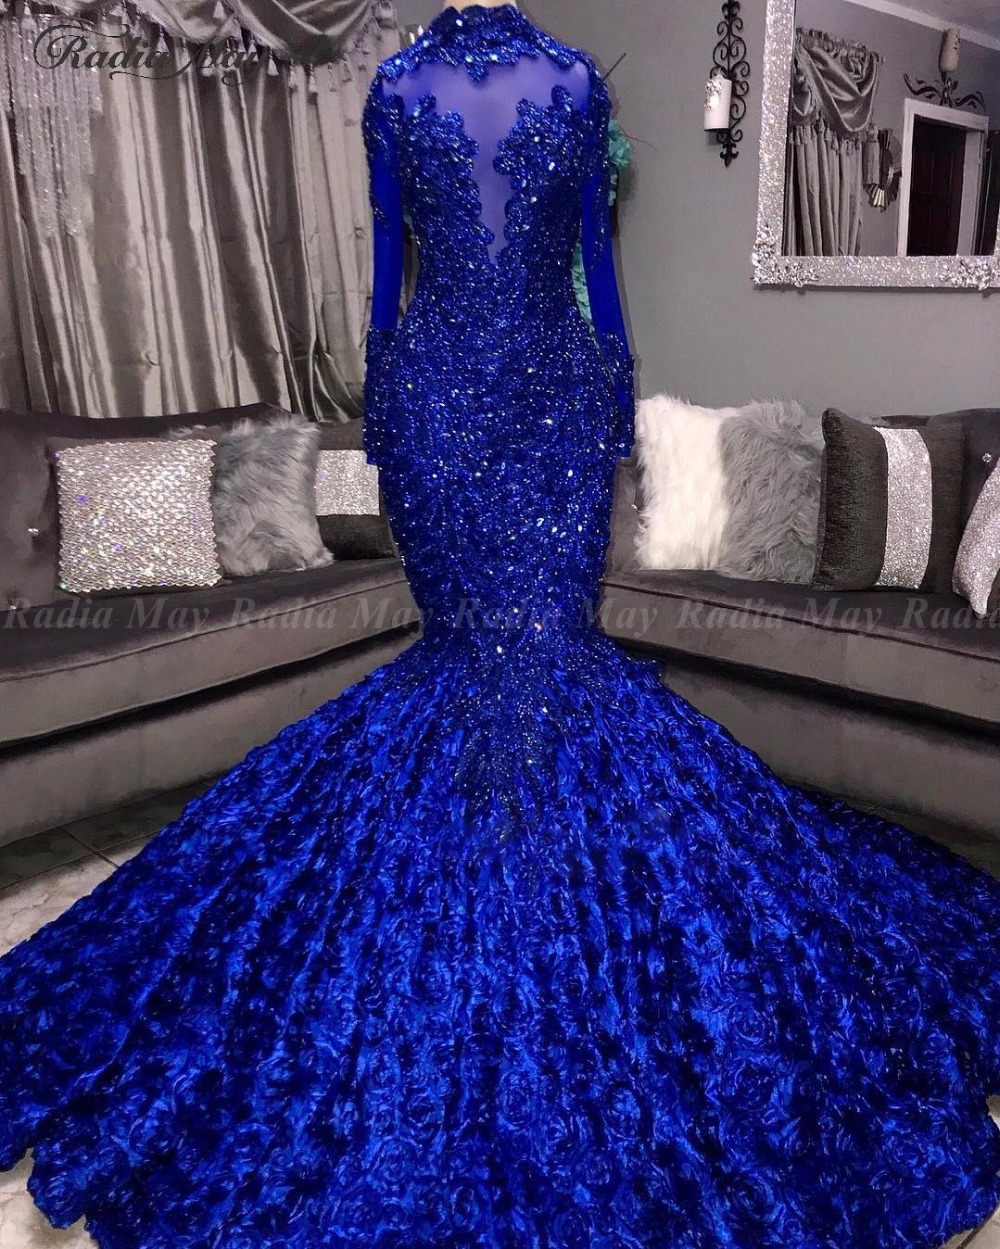 Royal Blue Beaded Sequin Mermaid Prom Dress With Long Sleeve 3 D Flowers High Neck Women Evening Dress, Formal Evening Gowns 2019